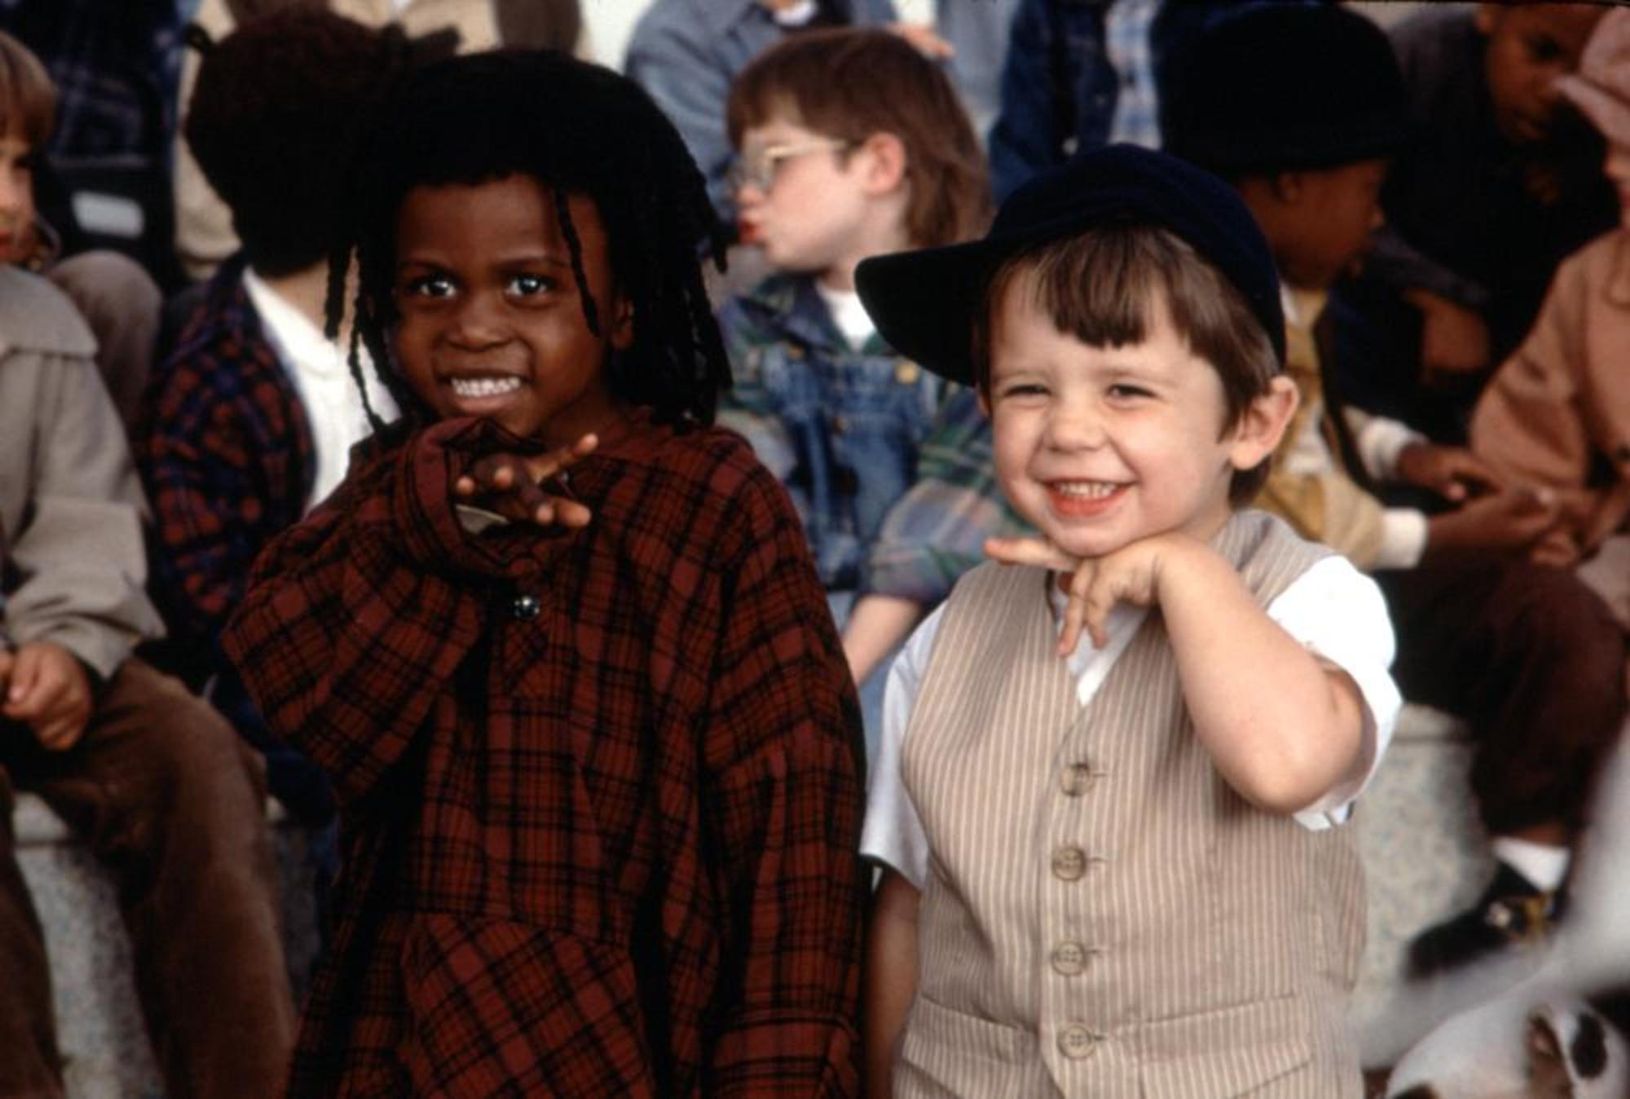 9 Facts About The Little Rascals That Will Make You Melt Like A Popsicle On The 4th Of July